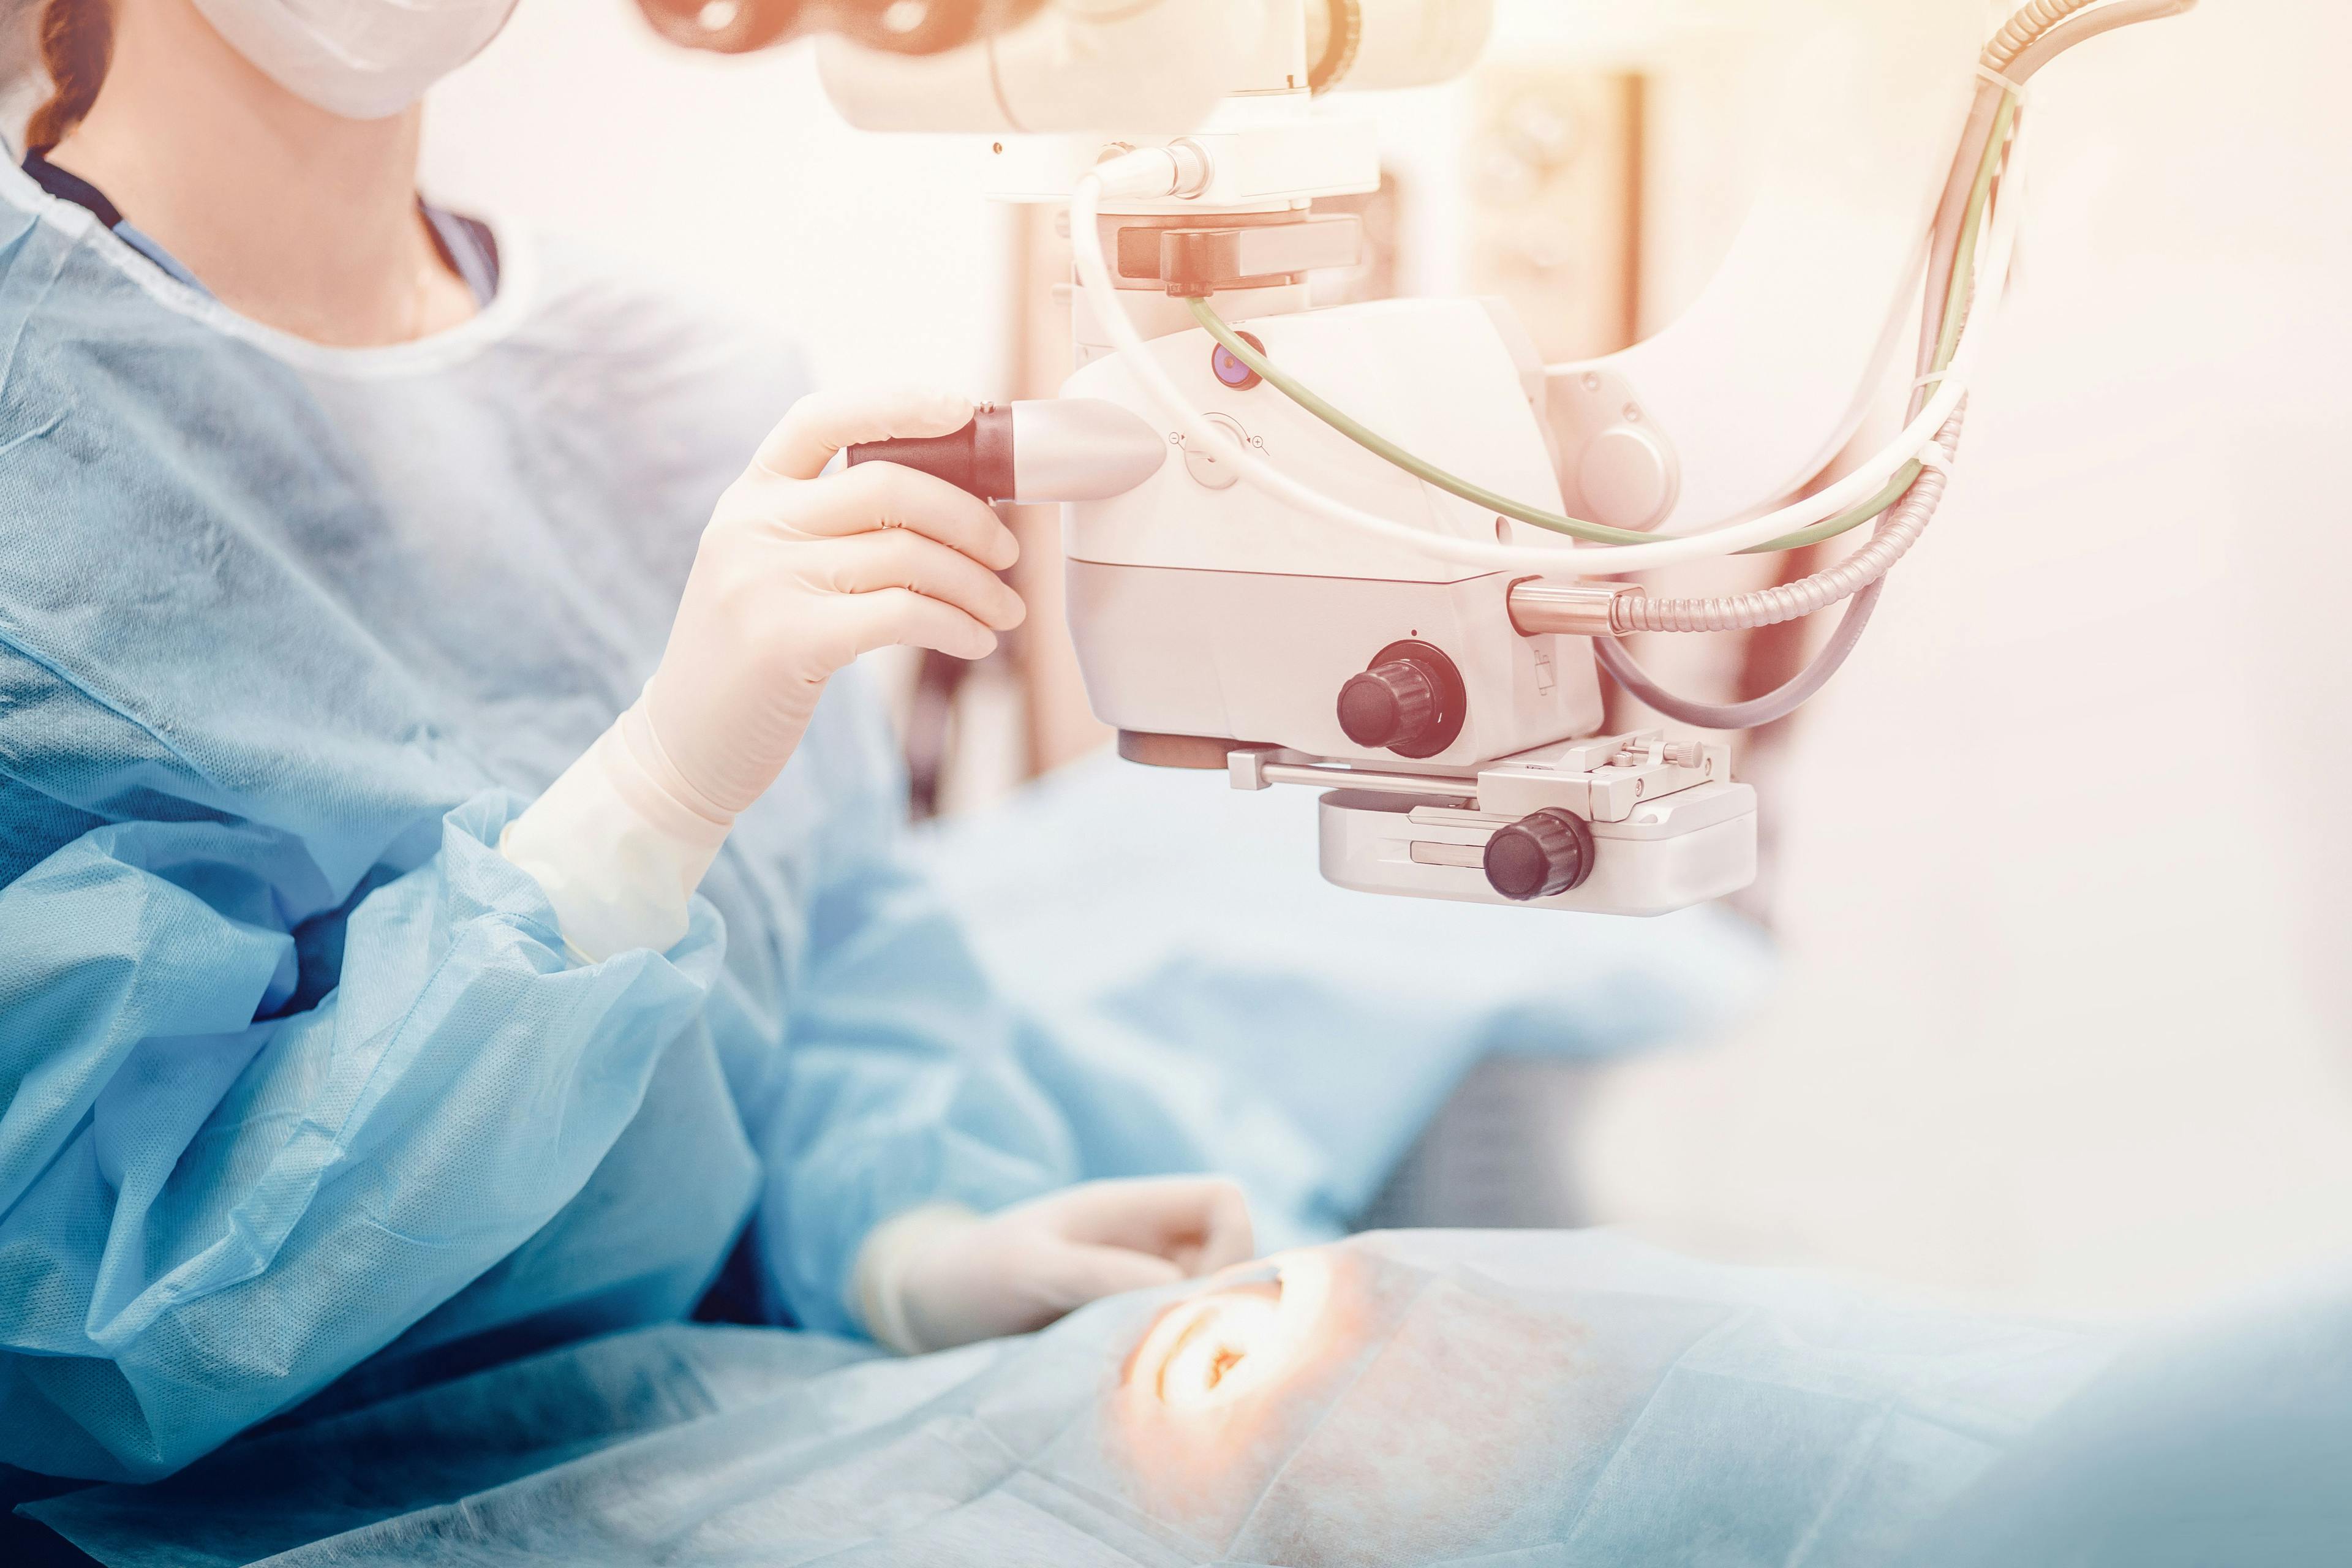 Evaluation during cataract surgery